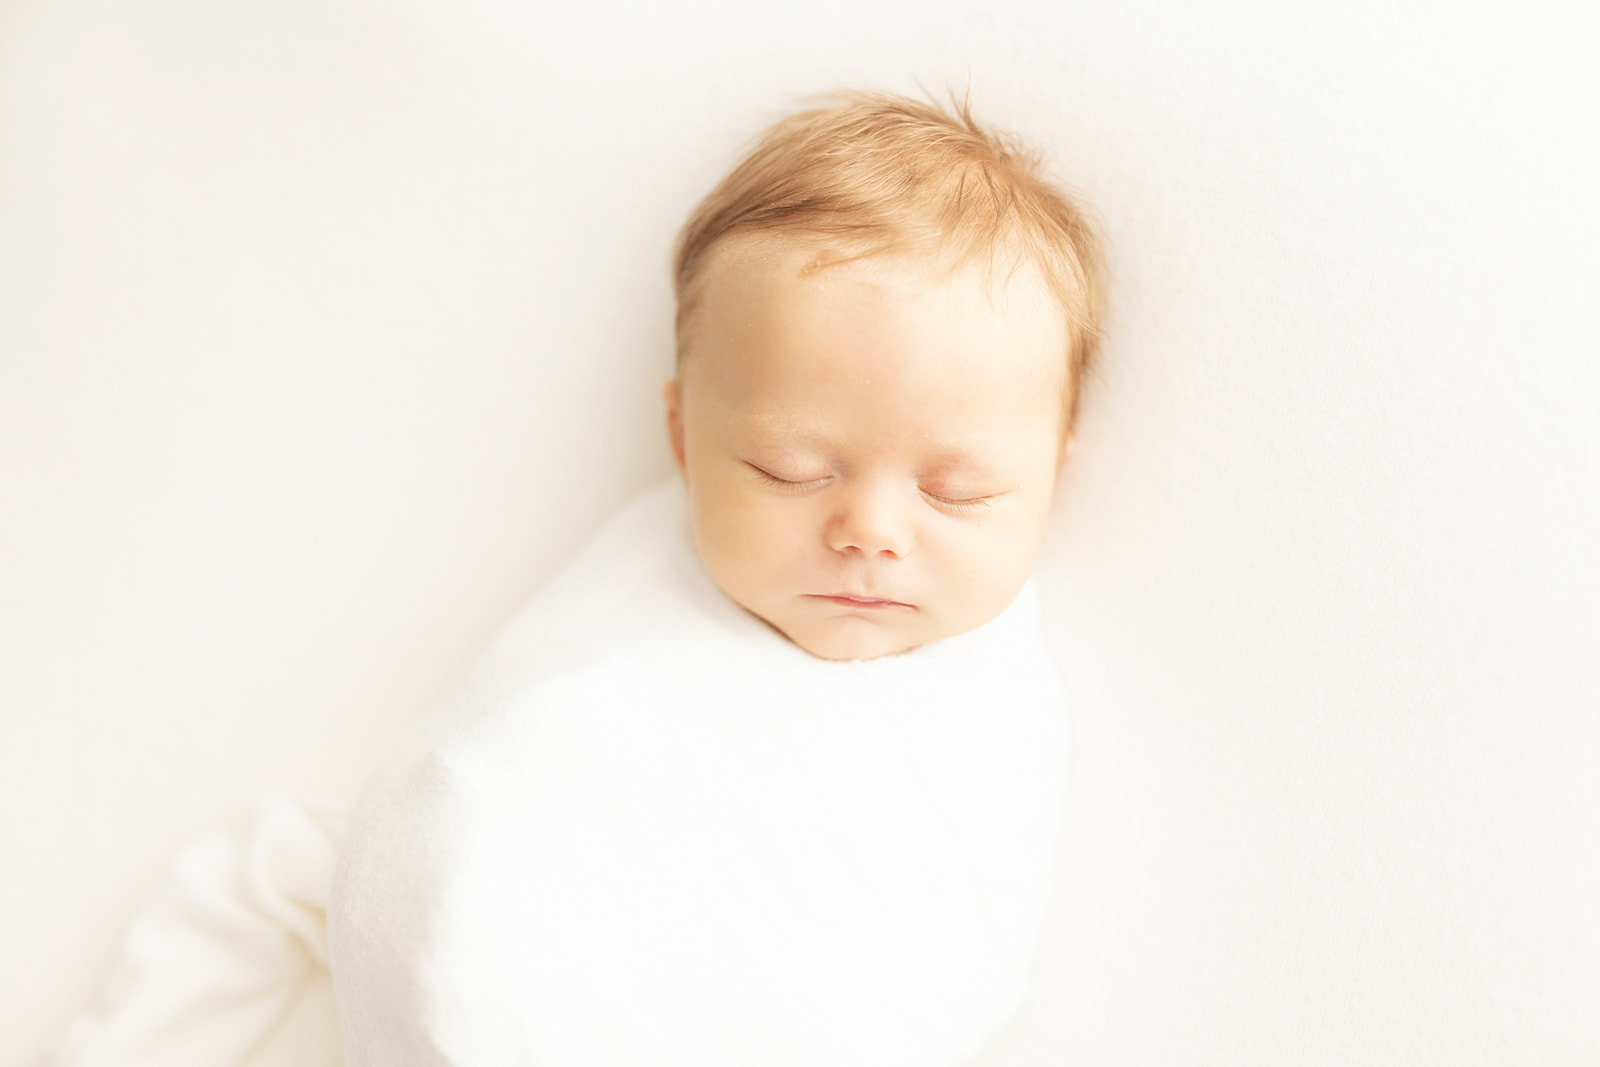 A newborn baby with blonde hair sleeps in a white swaddle next to a window